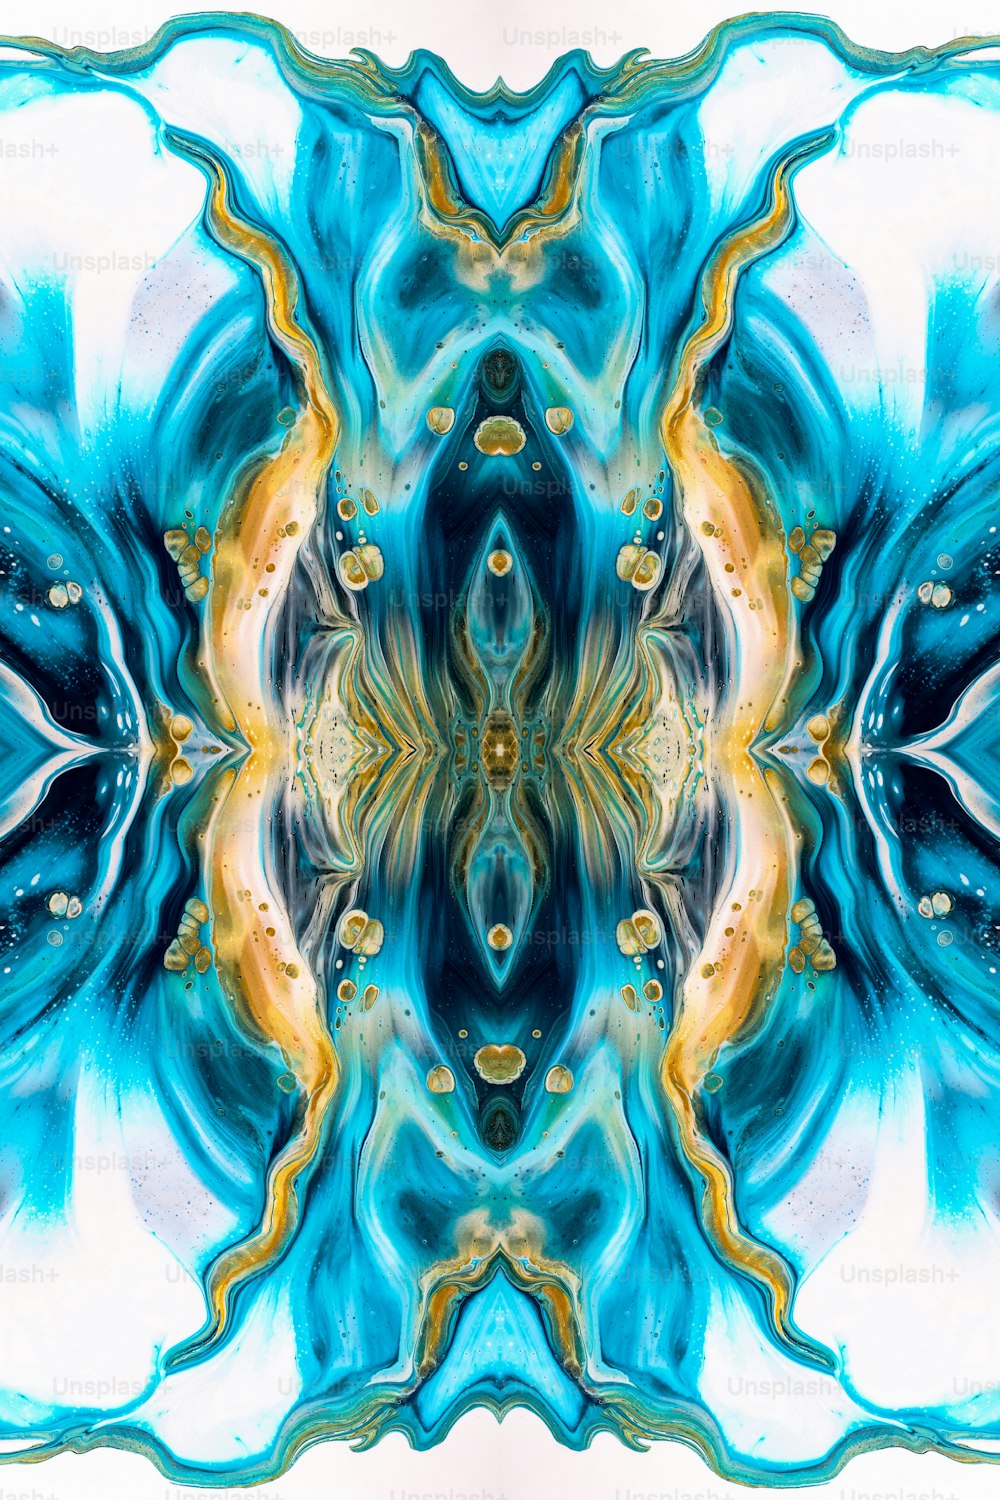 an abstract image of a blue and yellow flower